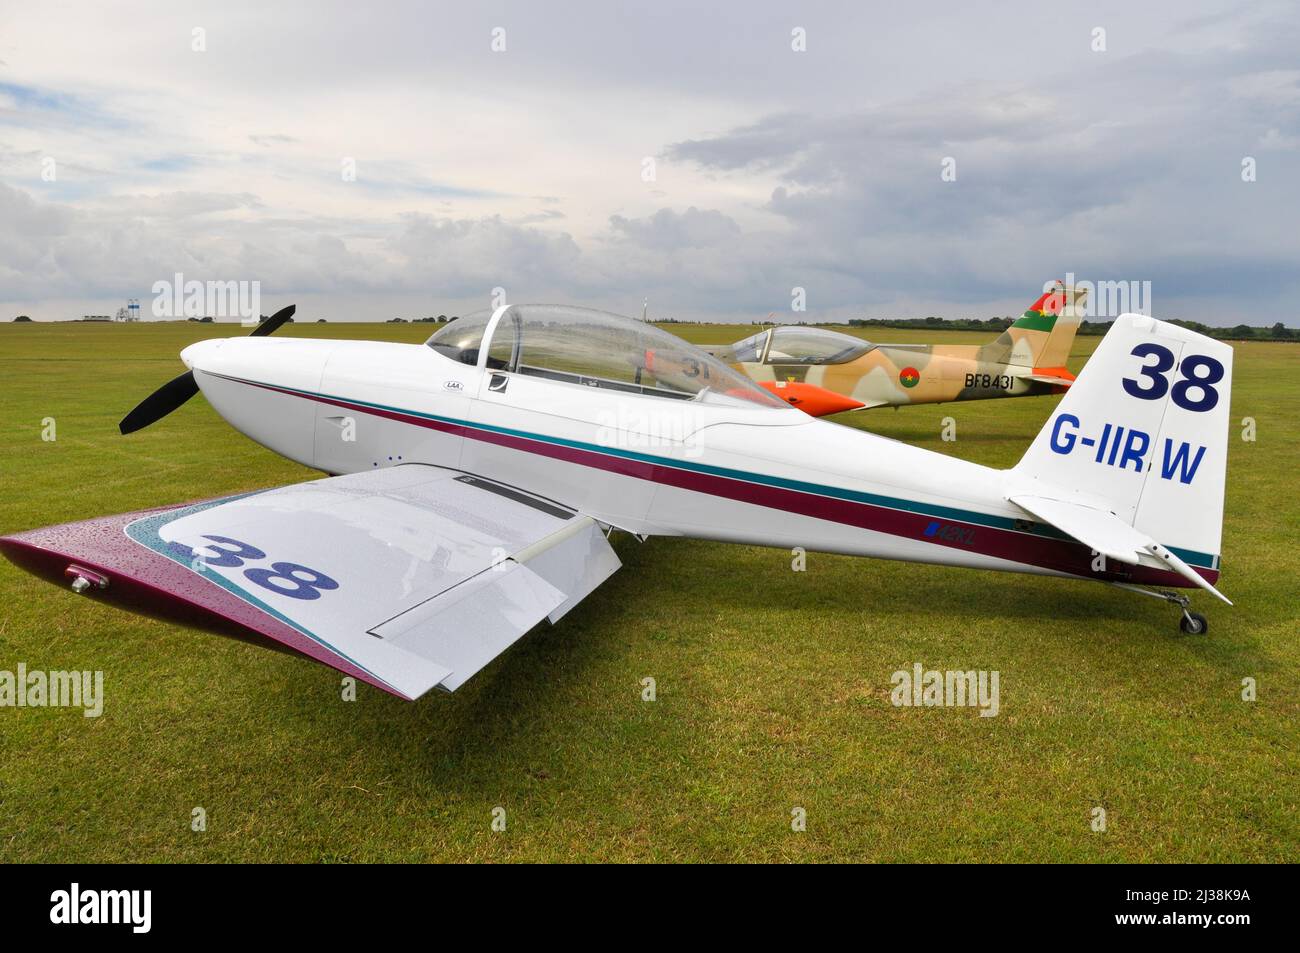 Van's RV-8 light aircraft plane at Sywell Aerodrome, Northamptonshire, UK,  for a Royal Aero Club air race. Race plane with number Stock Photo - Alamy